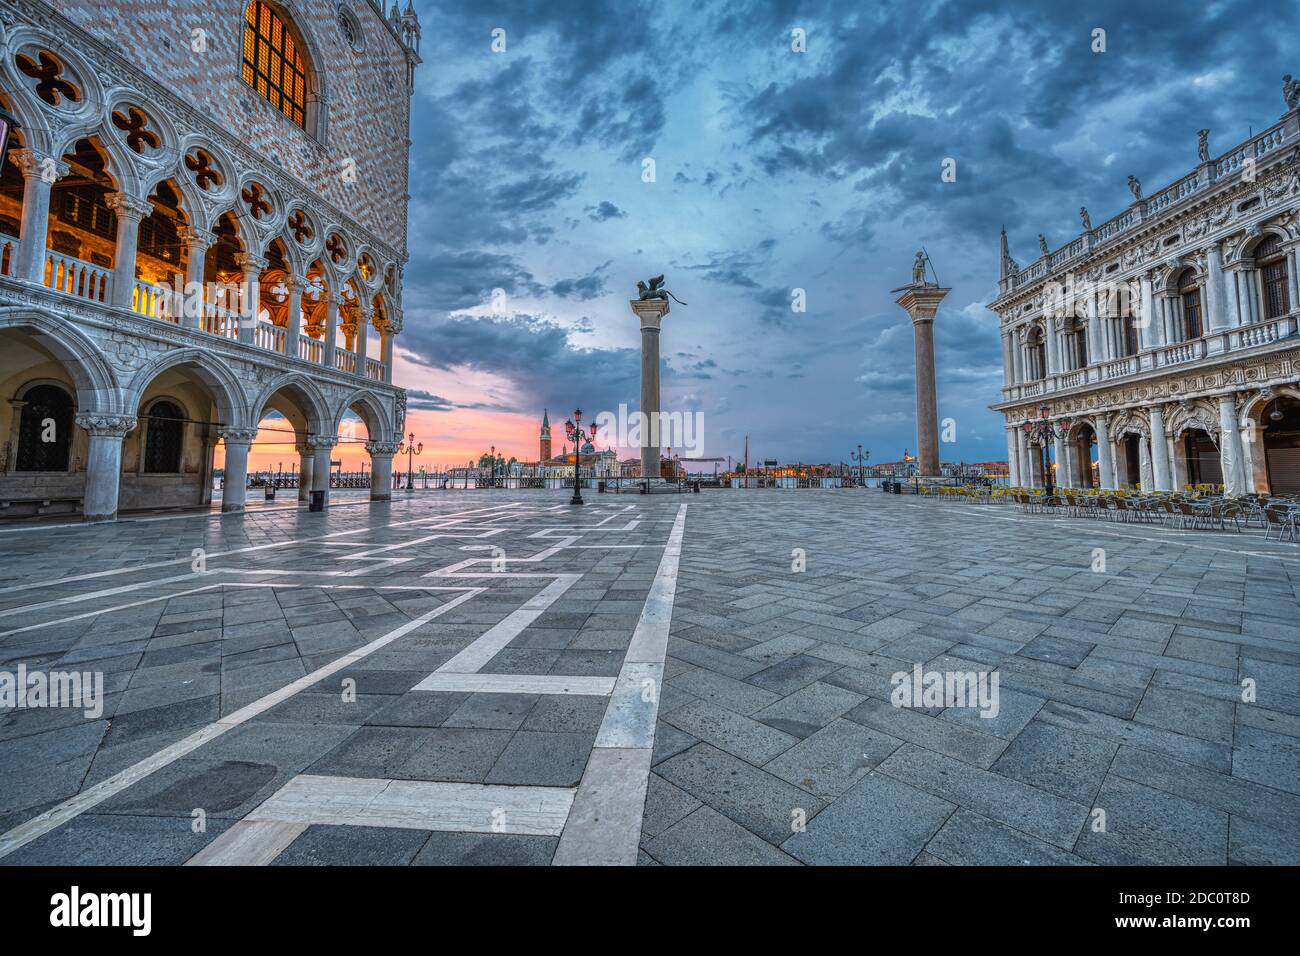 Sunrise at the Piazzetta San Marco and the Palazza Ducale in Venice, Italy Stock Photo